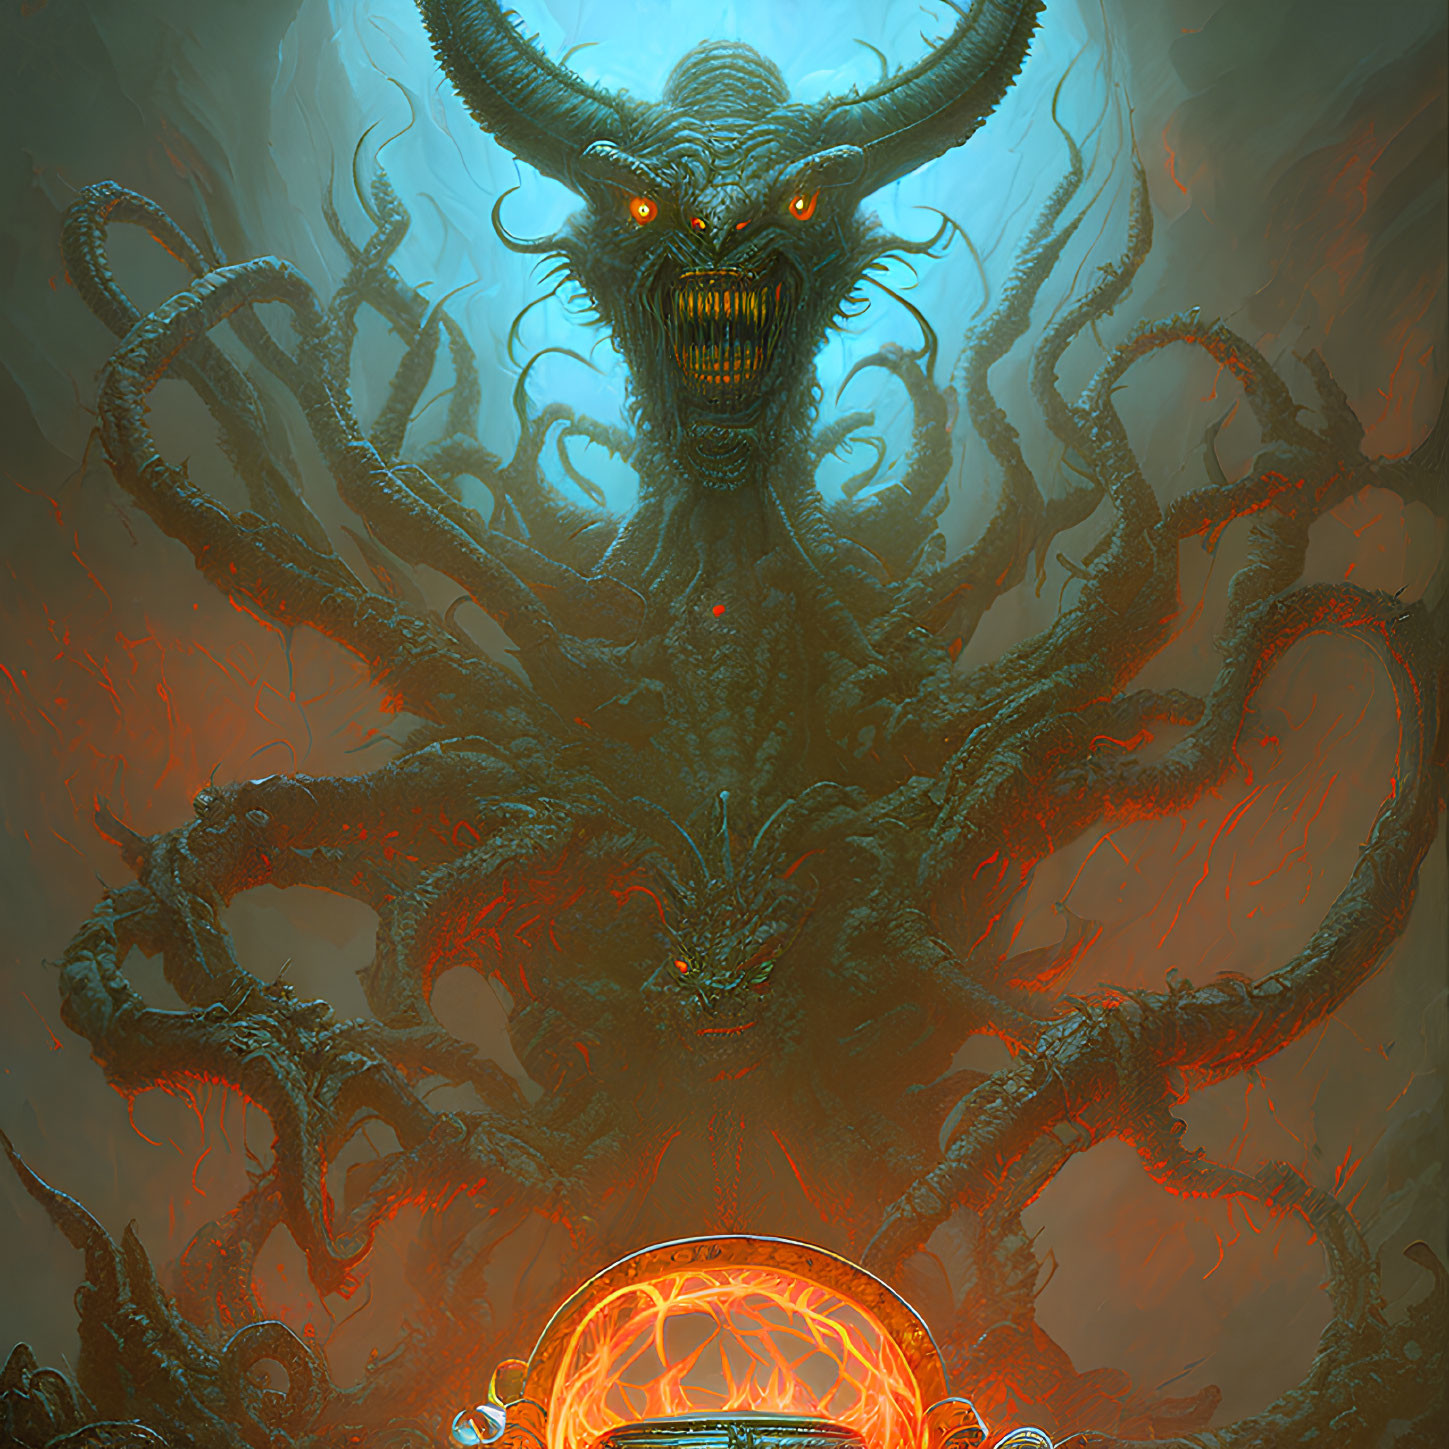 Mystical orb with glowing eyes and horns in fiery setting